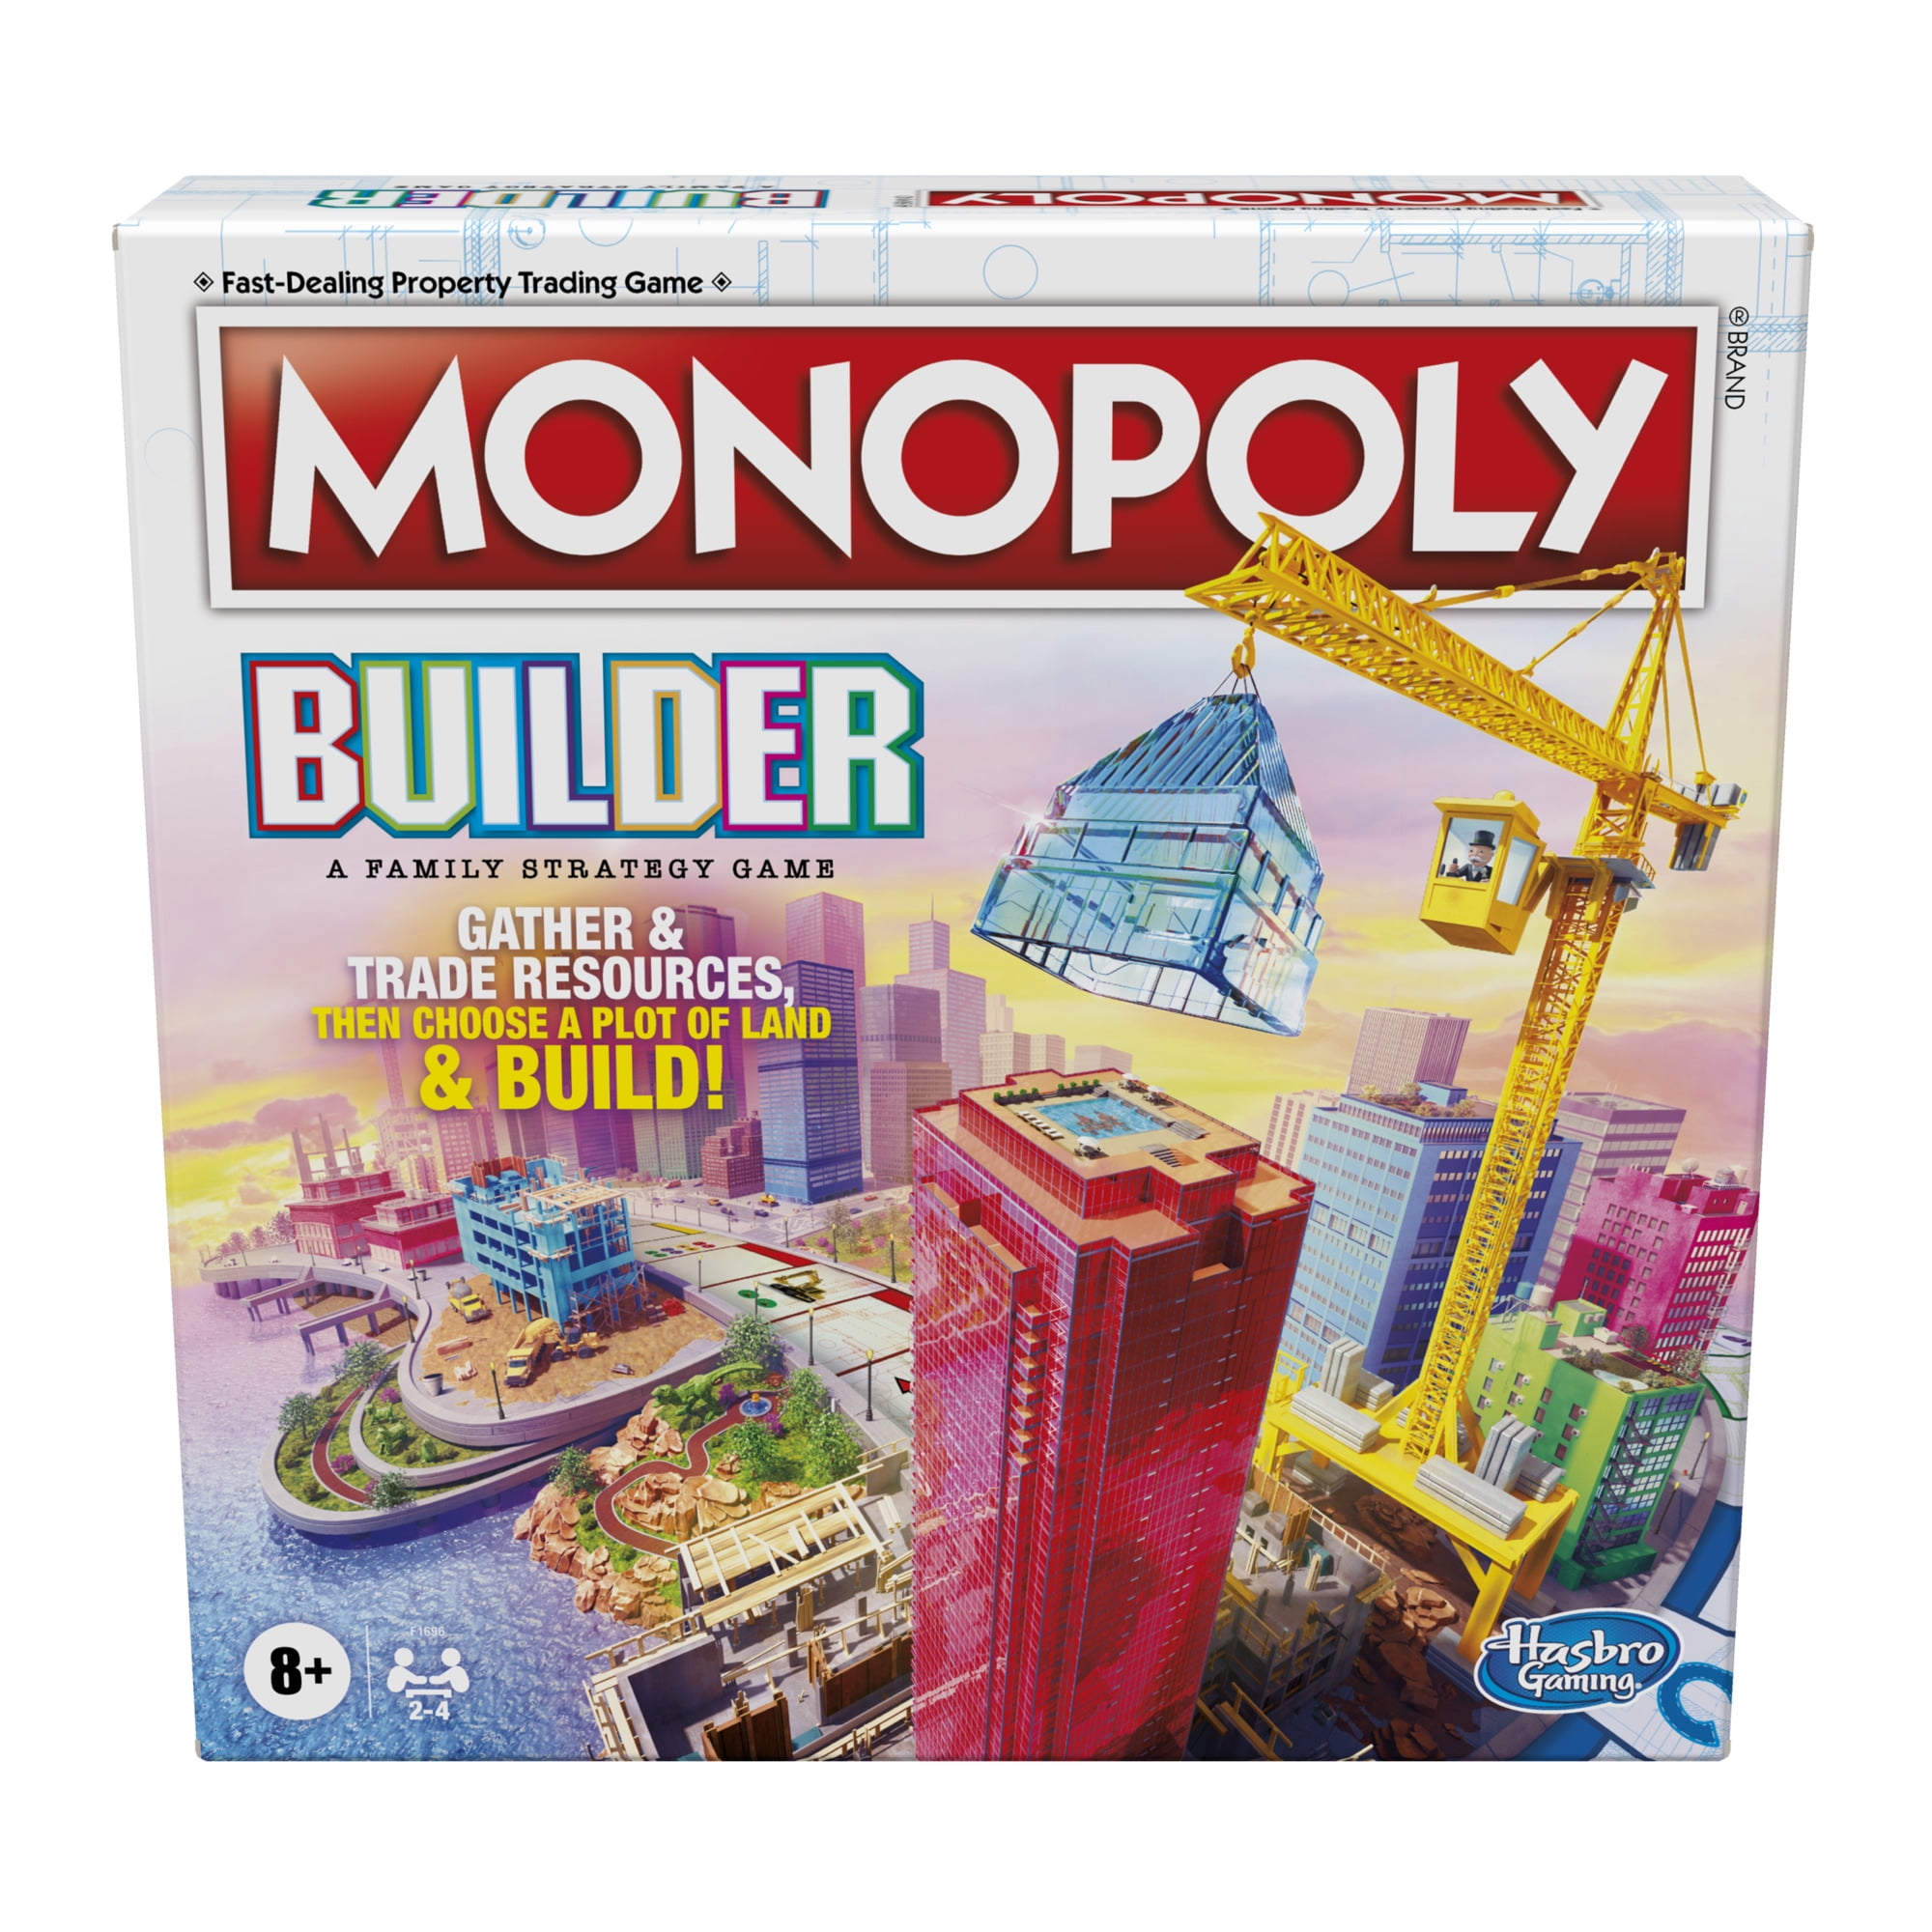 Builder Board Game, by Monopoly